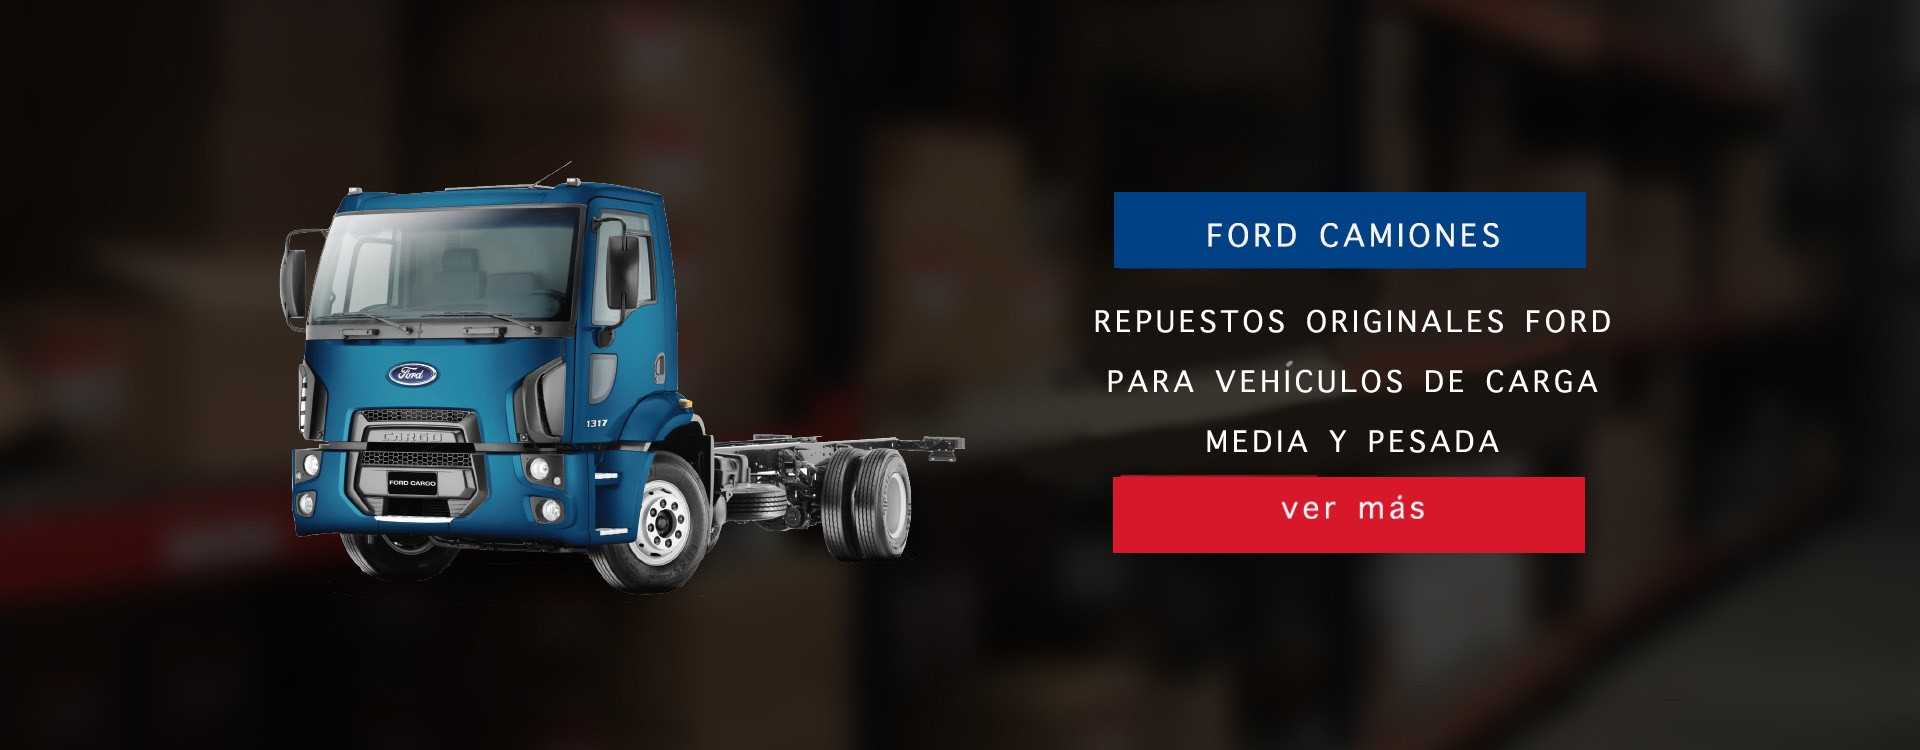 FORD Camiones